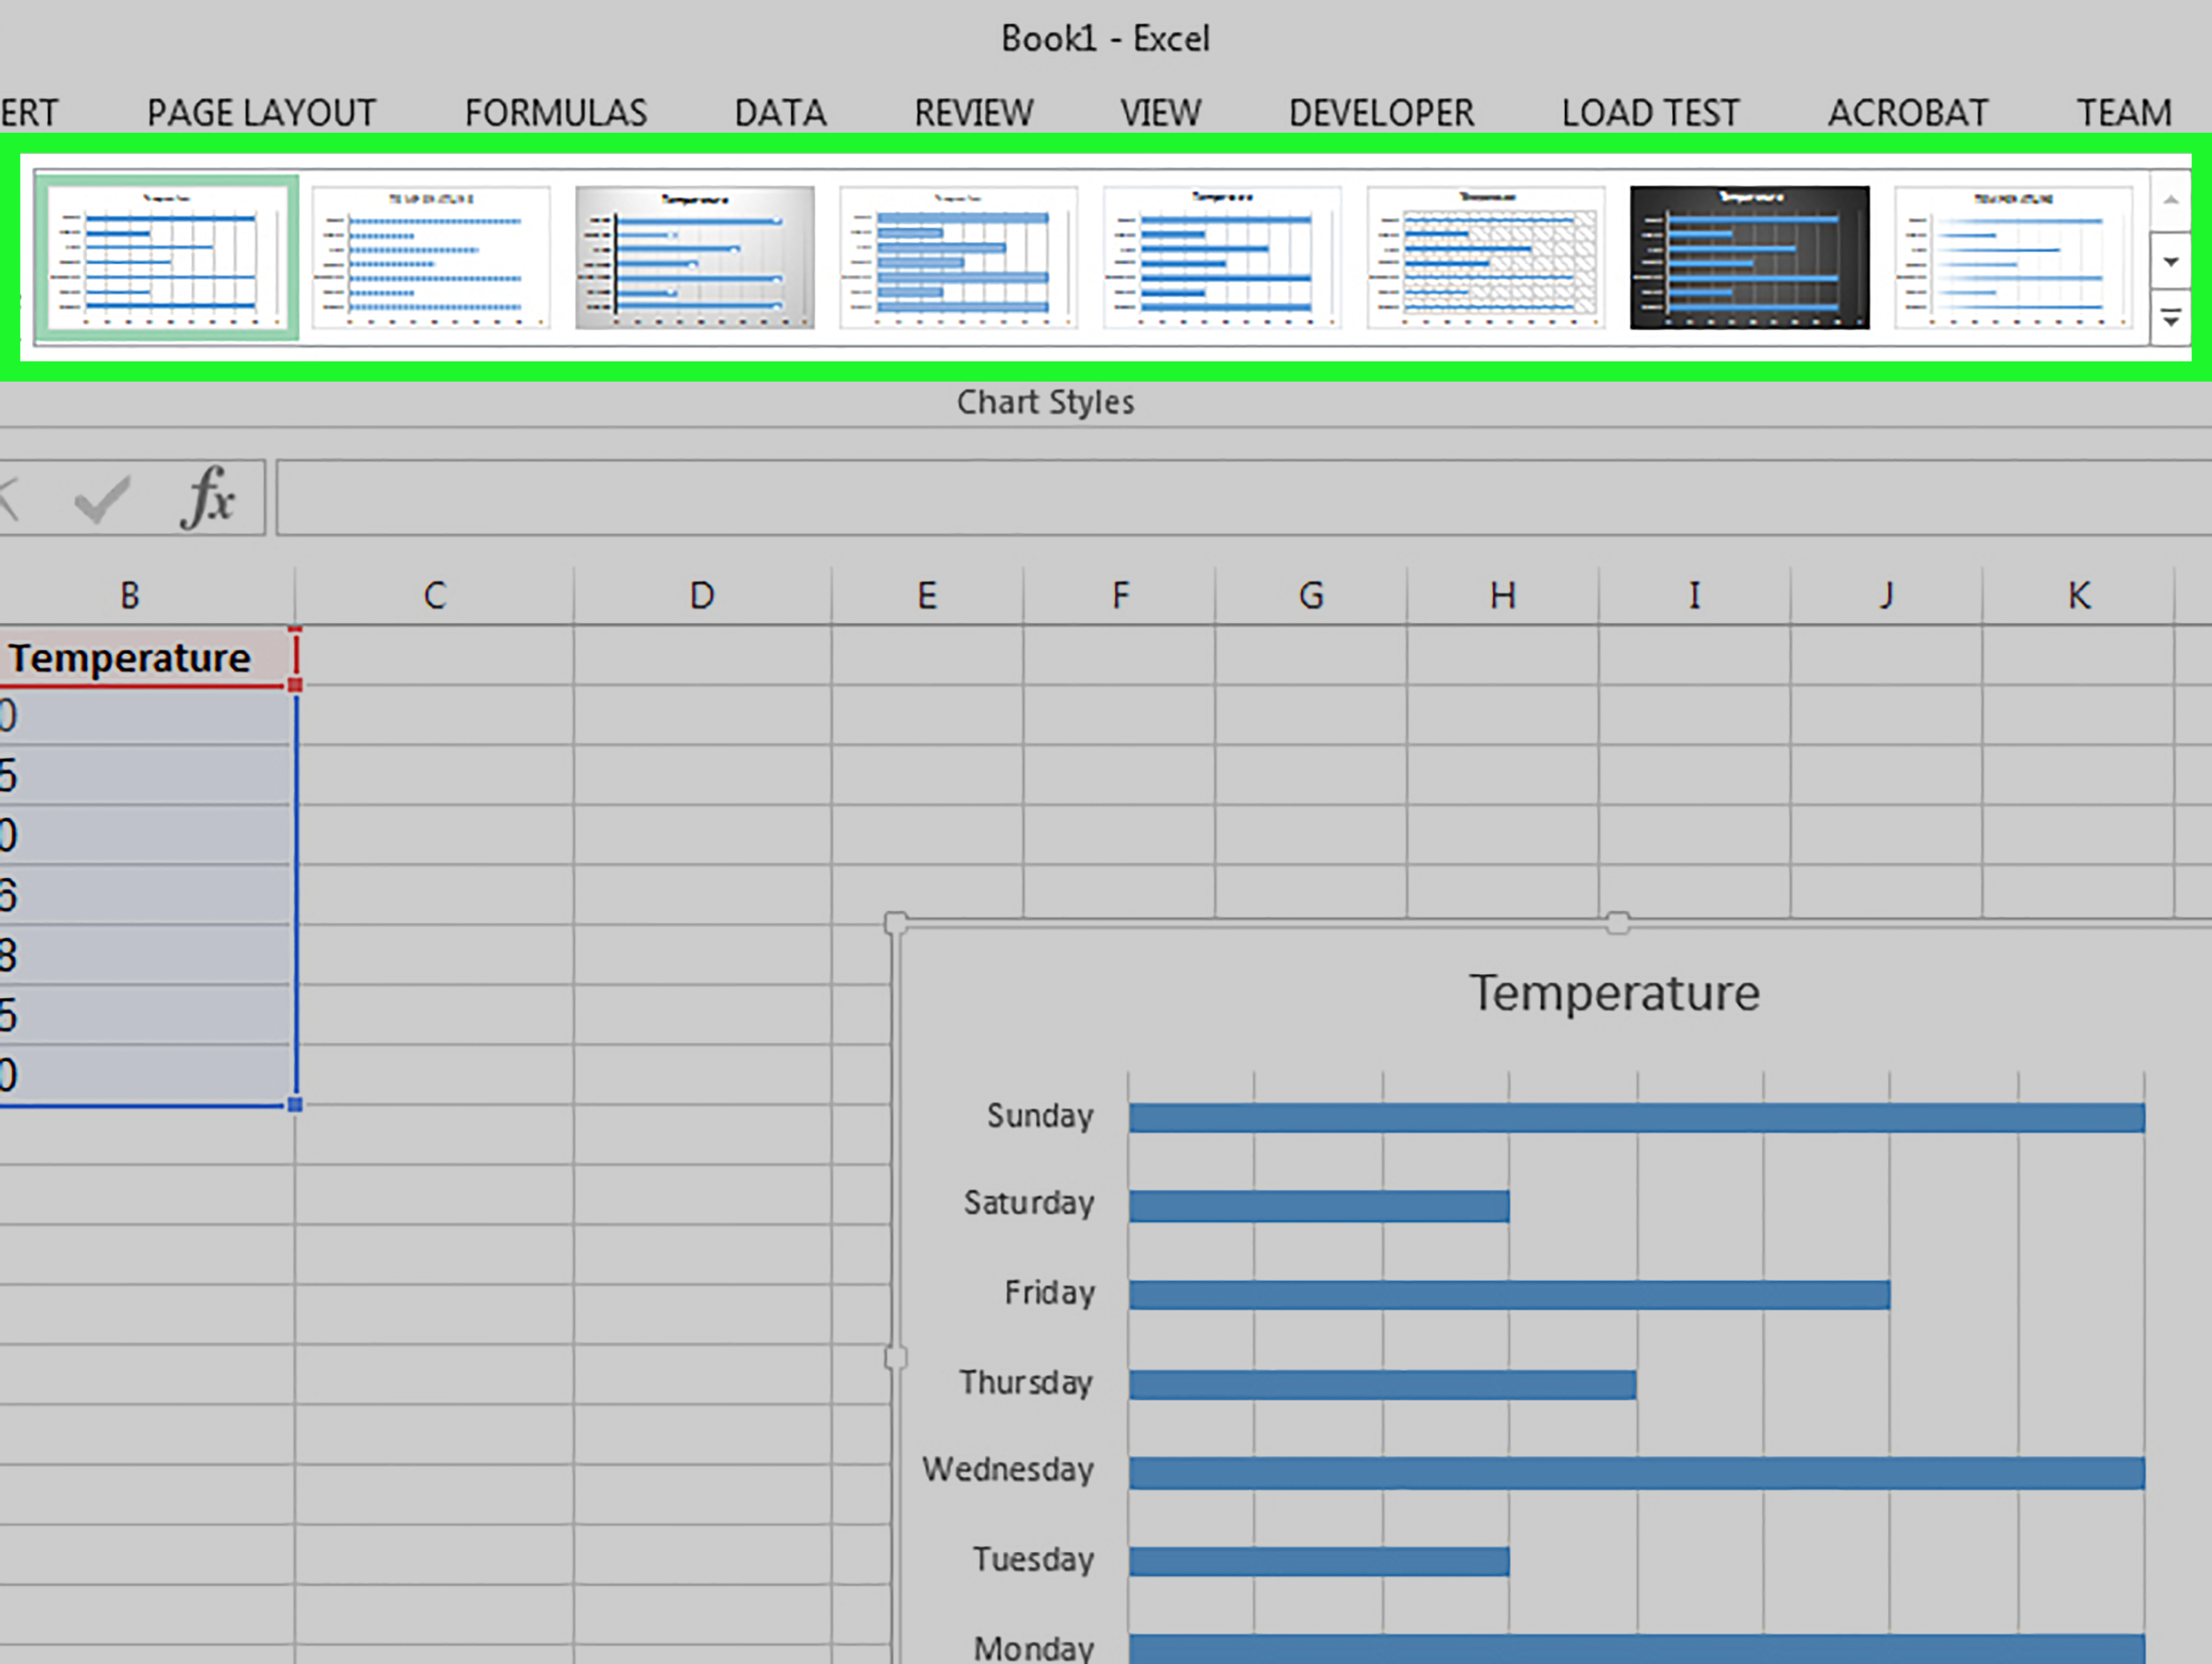 How To Make A Graph In Spreadsheet Regarding How To Make A Bar Graph In Excel: 10 Steps With Pictures